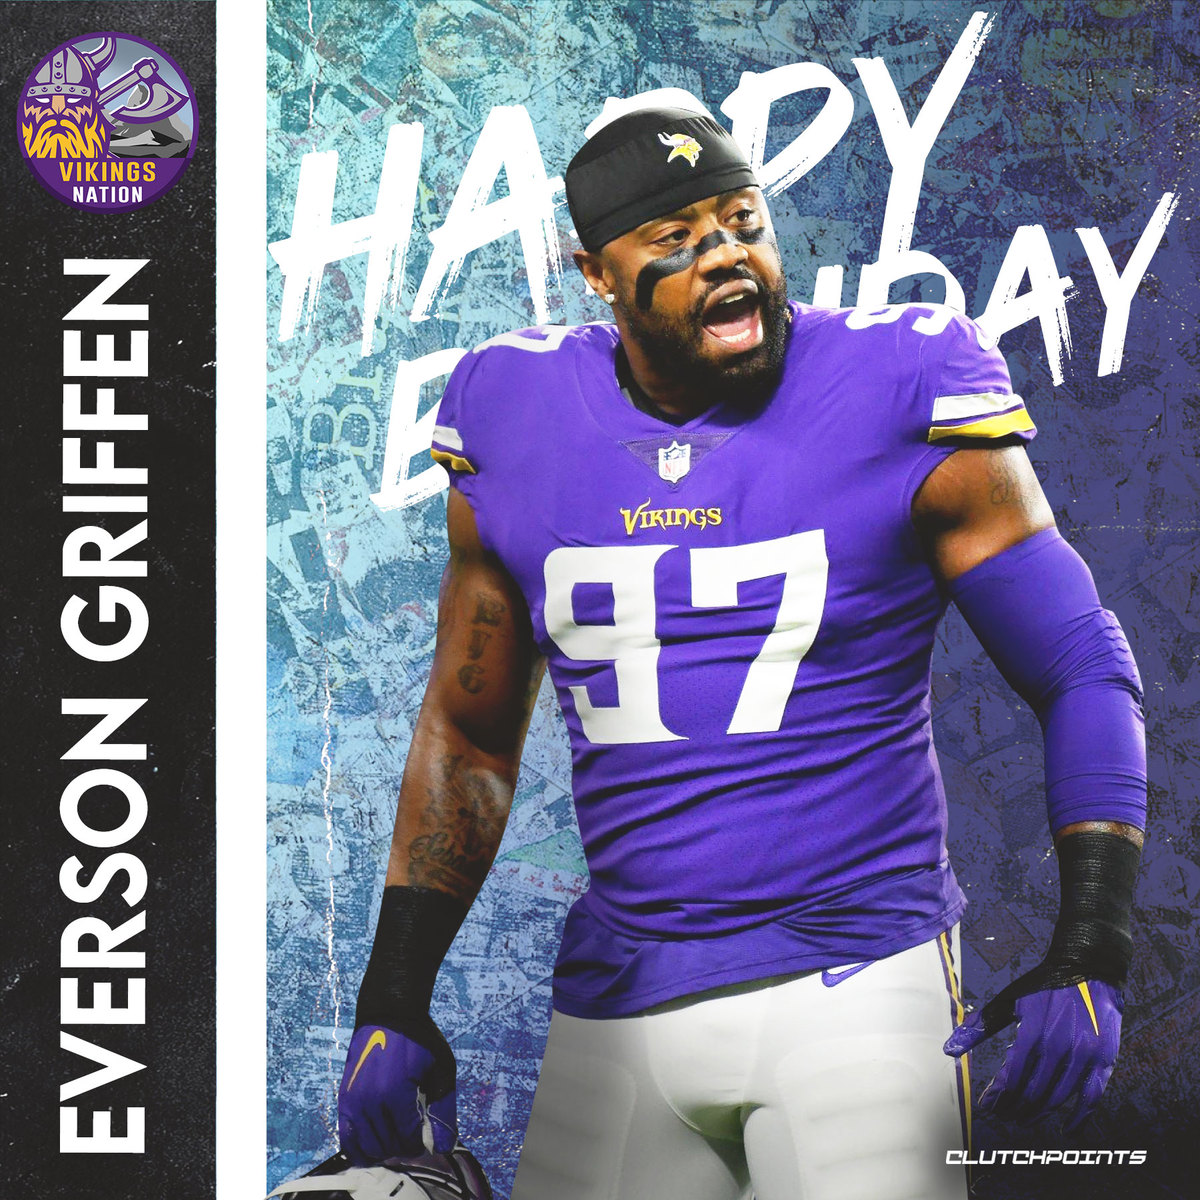 Vikings Nation, join us in wishing a 4x Pro-Bowler, Everson Griffen, a happy 35th birthday 